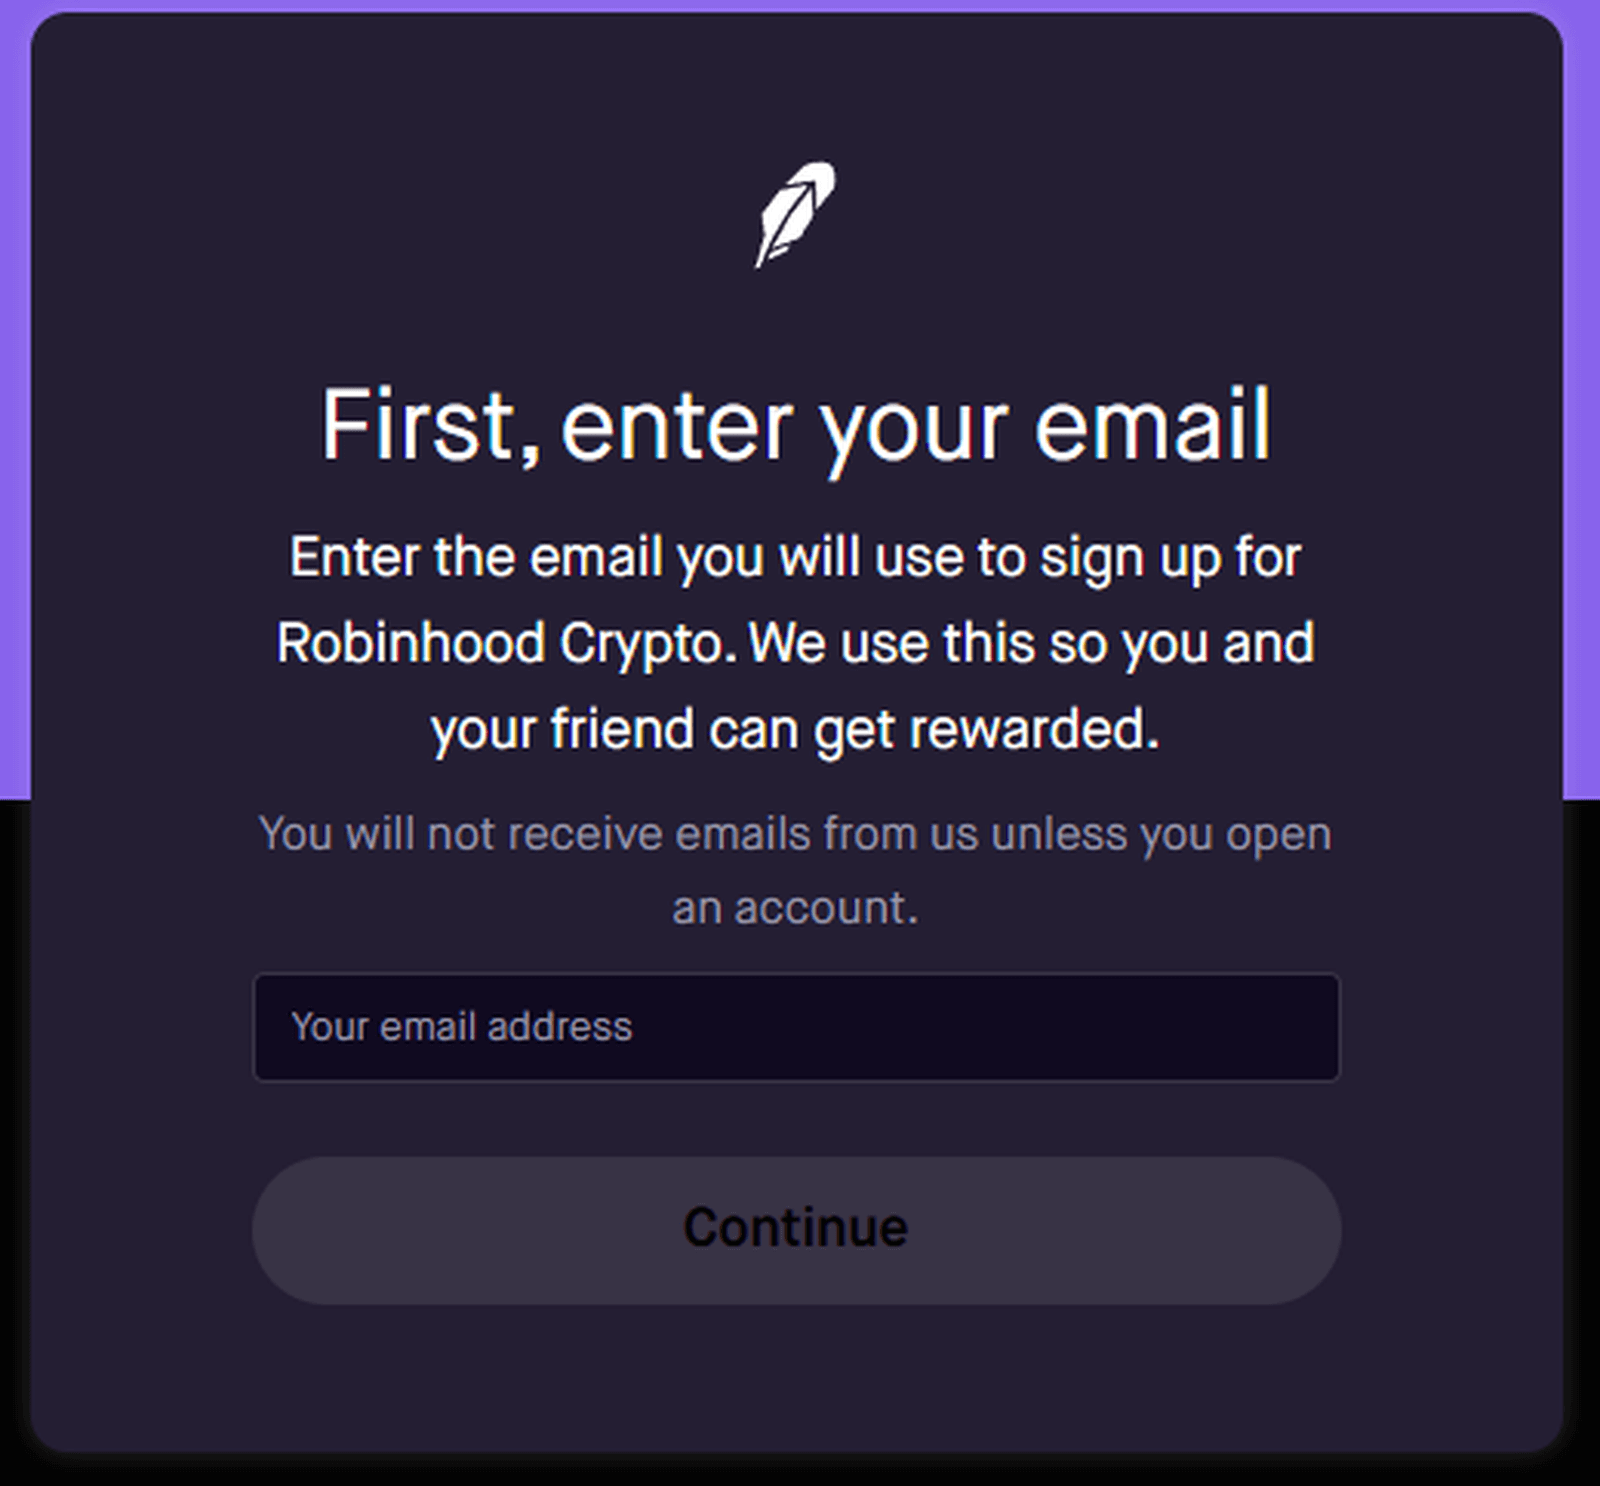 Enter your email address to receive your BTC welcome bonus from Robinhood Crypto